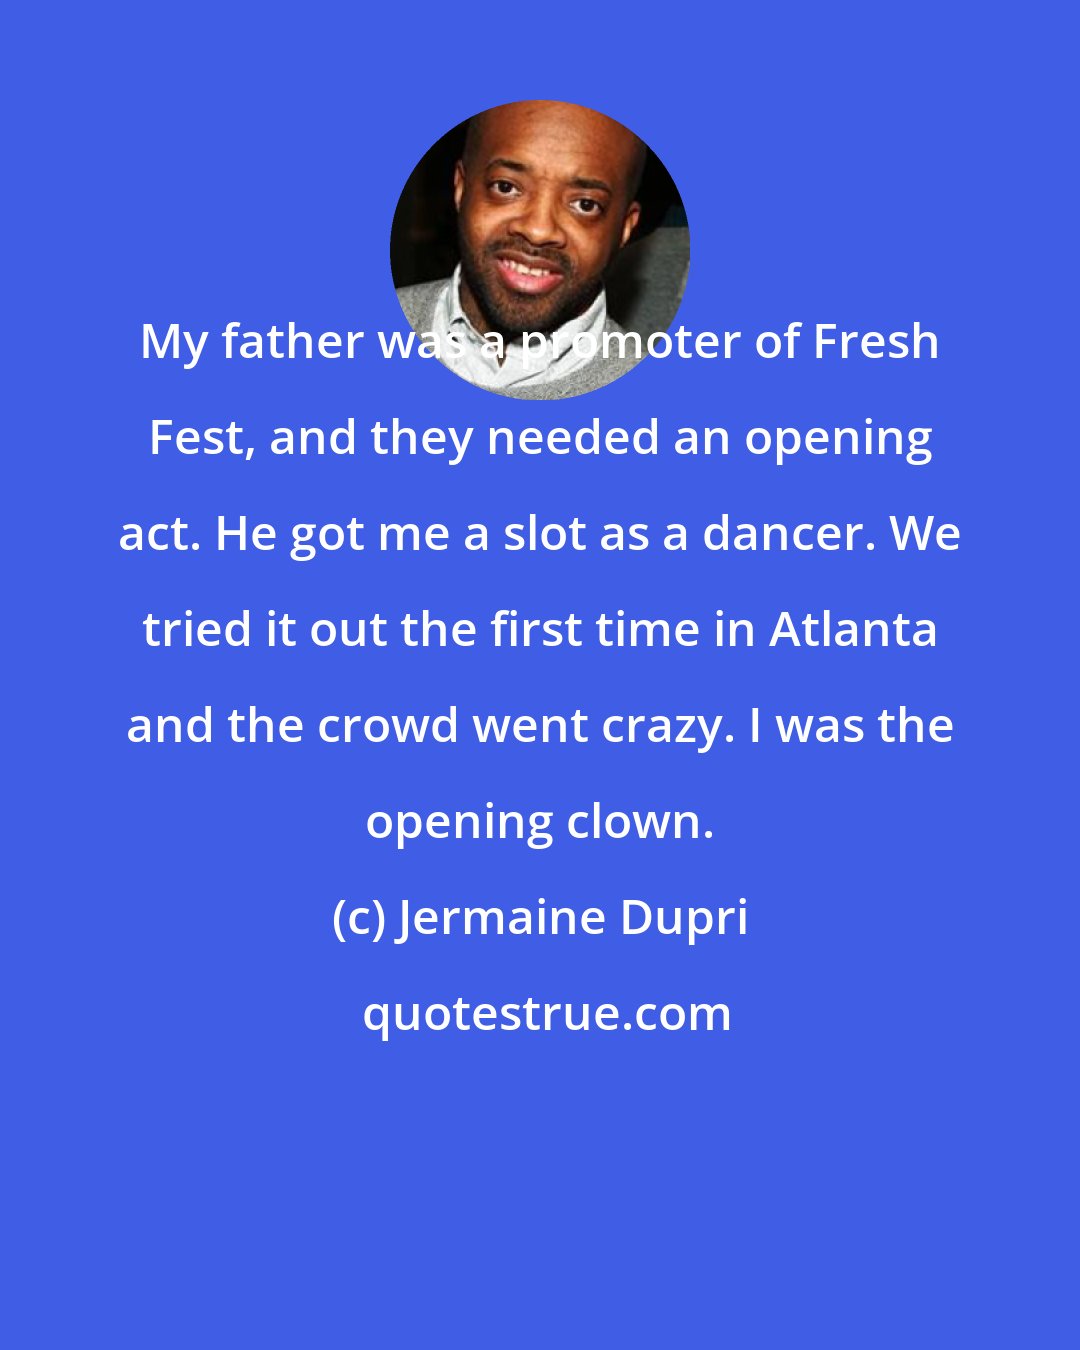 Jermaine Dupri: My father was a promoter of Fresh Fest, and they needed an opening act. He got me a slot as a dancer. We tried it out the first time in Atlanta and the crowd went crazy. I was the opening clown.